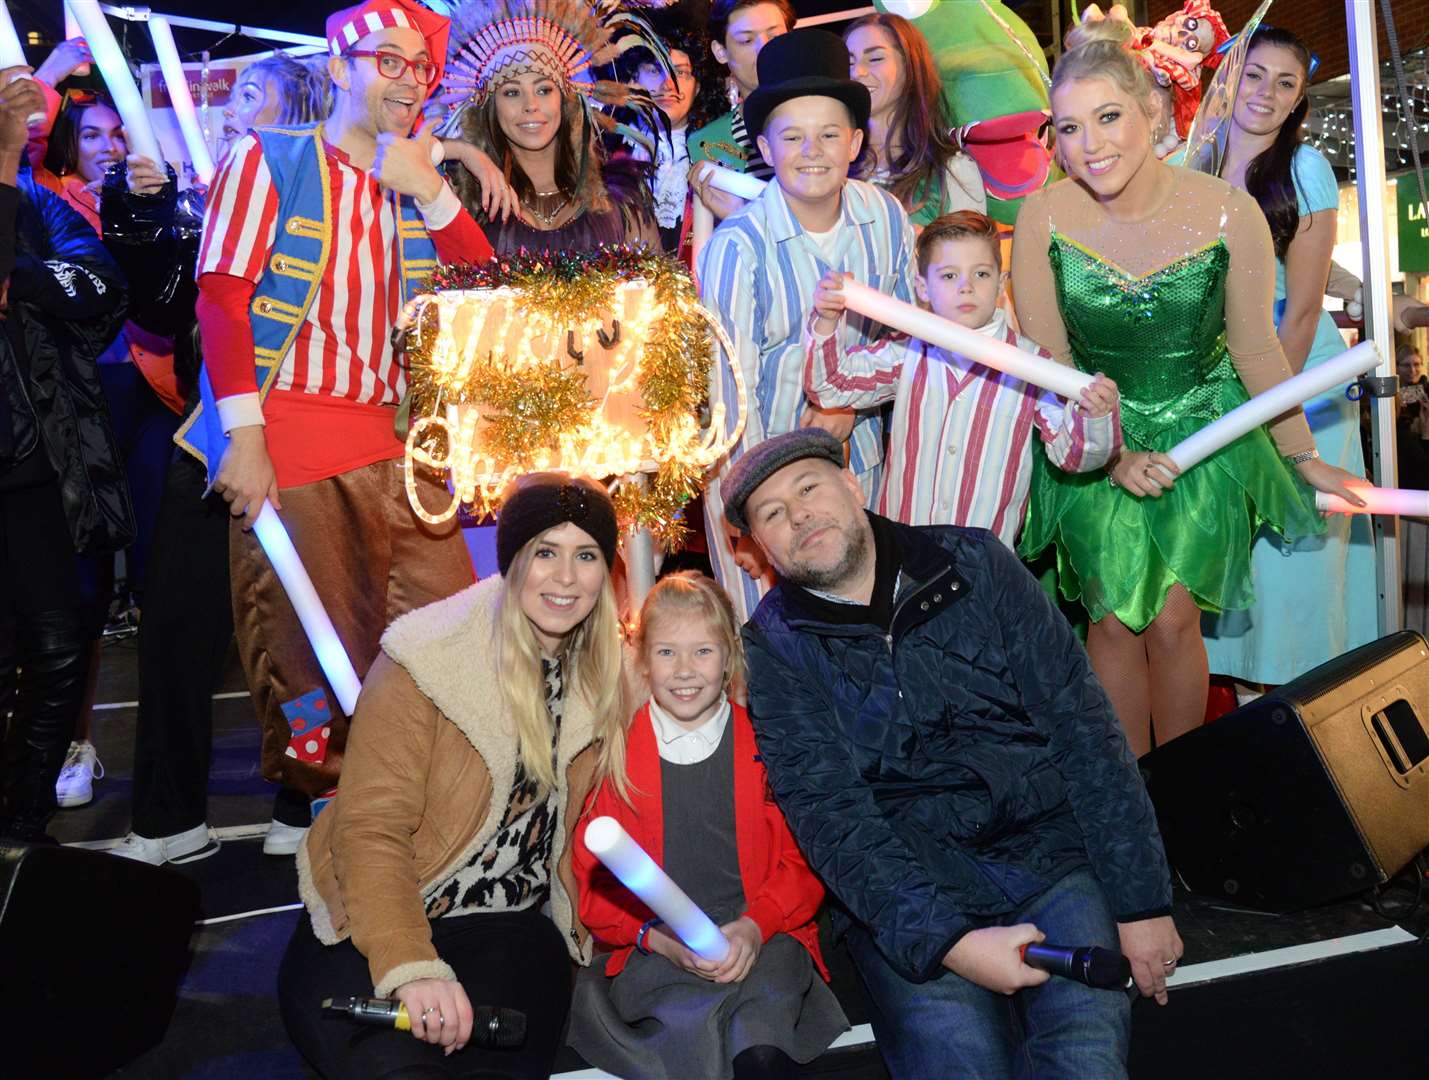 Laura and Garry from kmfm's breakfast show will switch on Canterbury's Christmas Lights